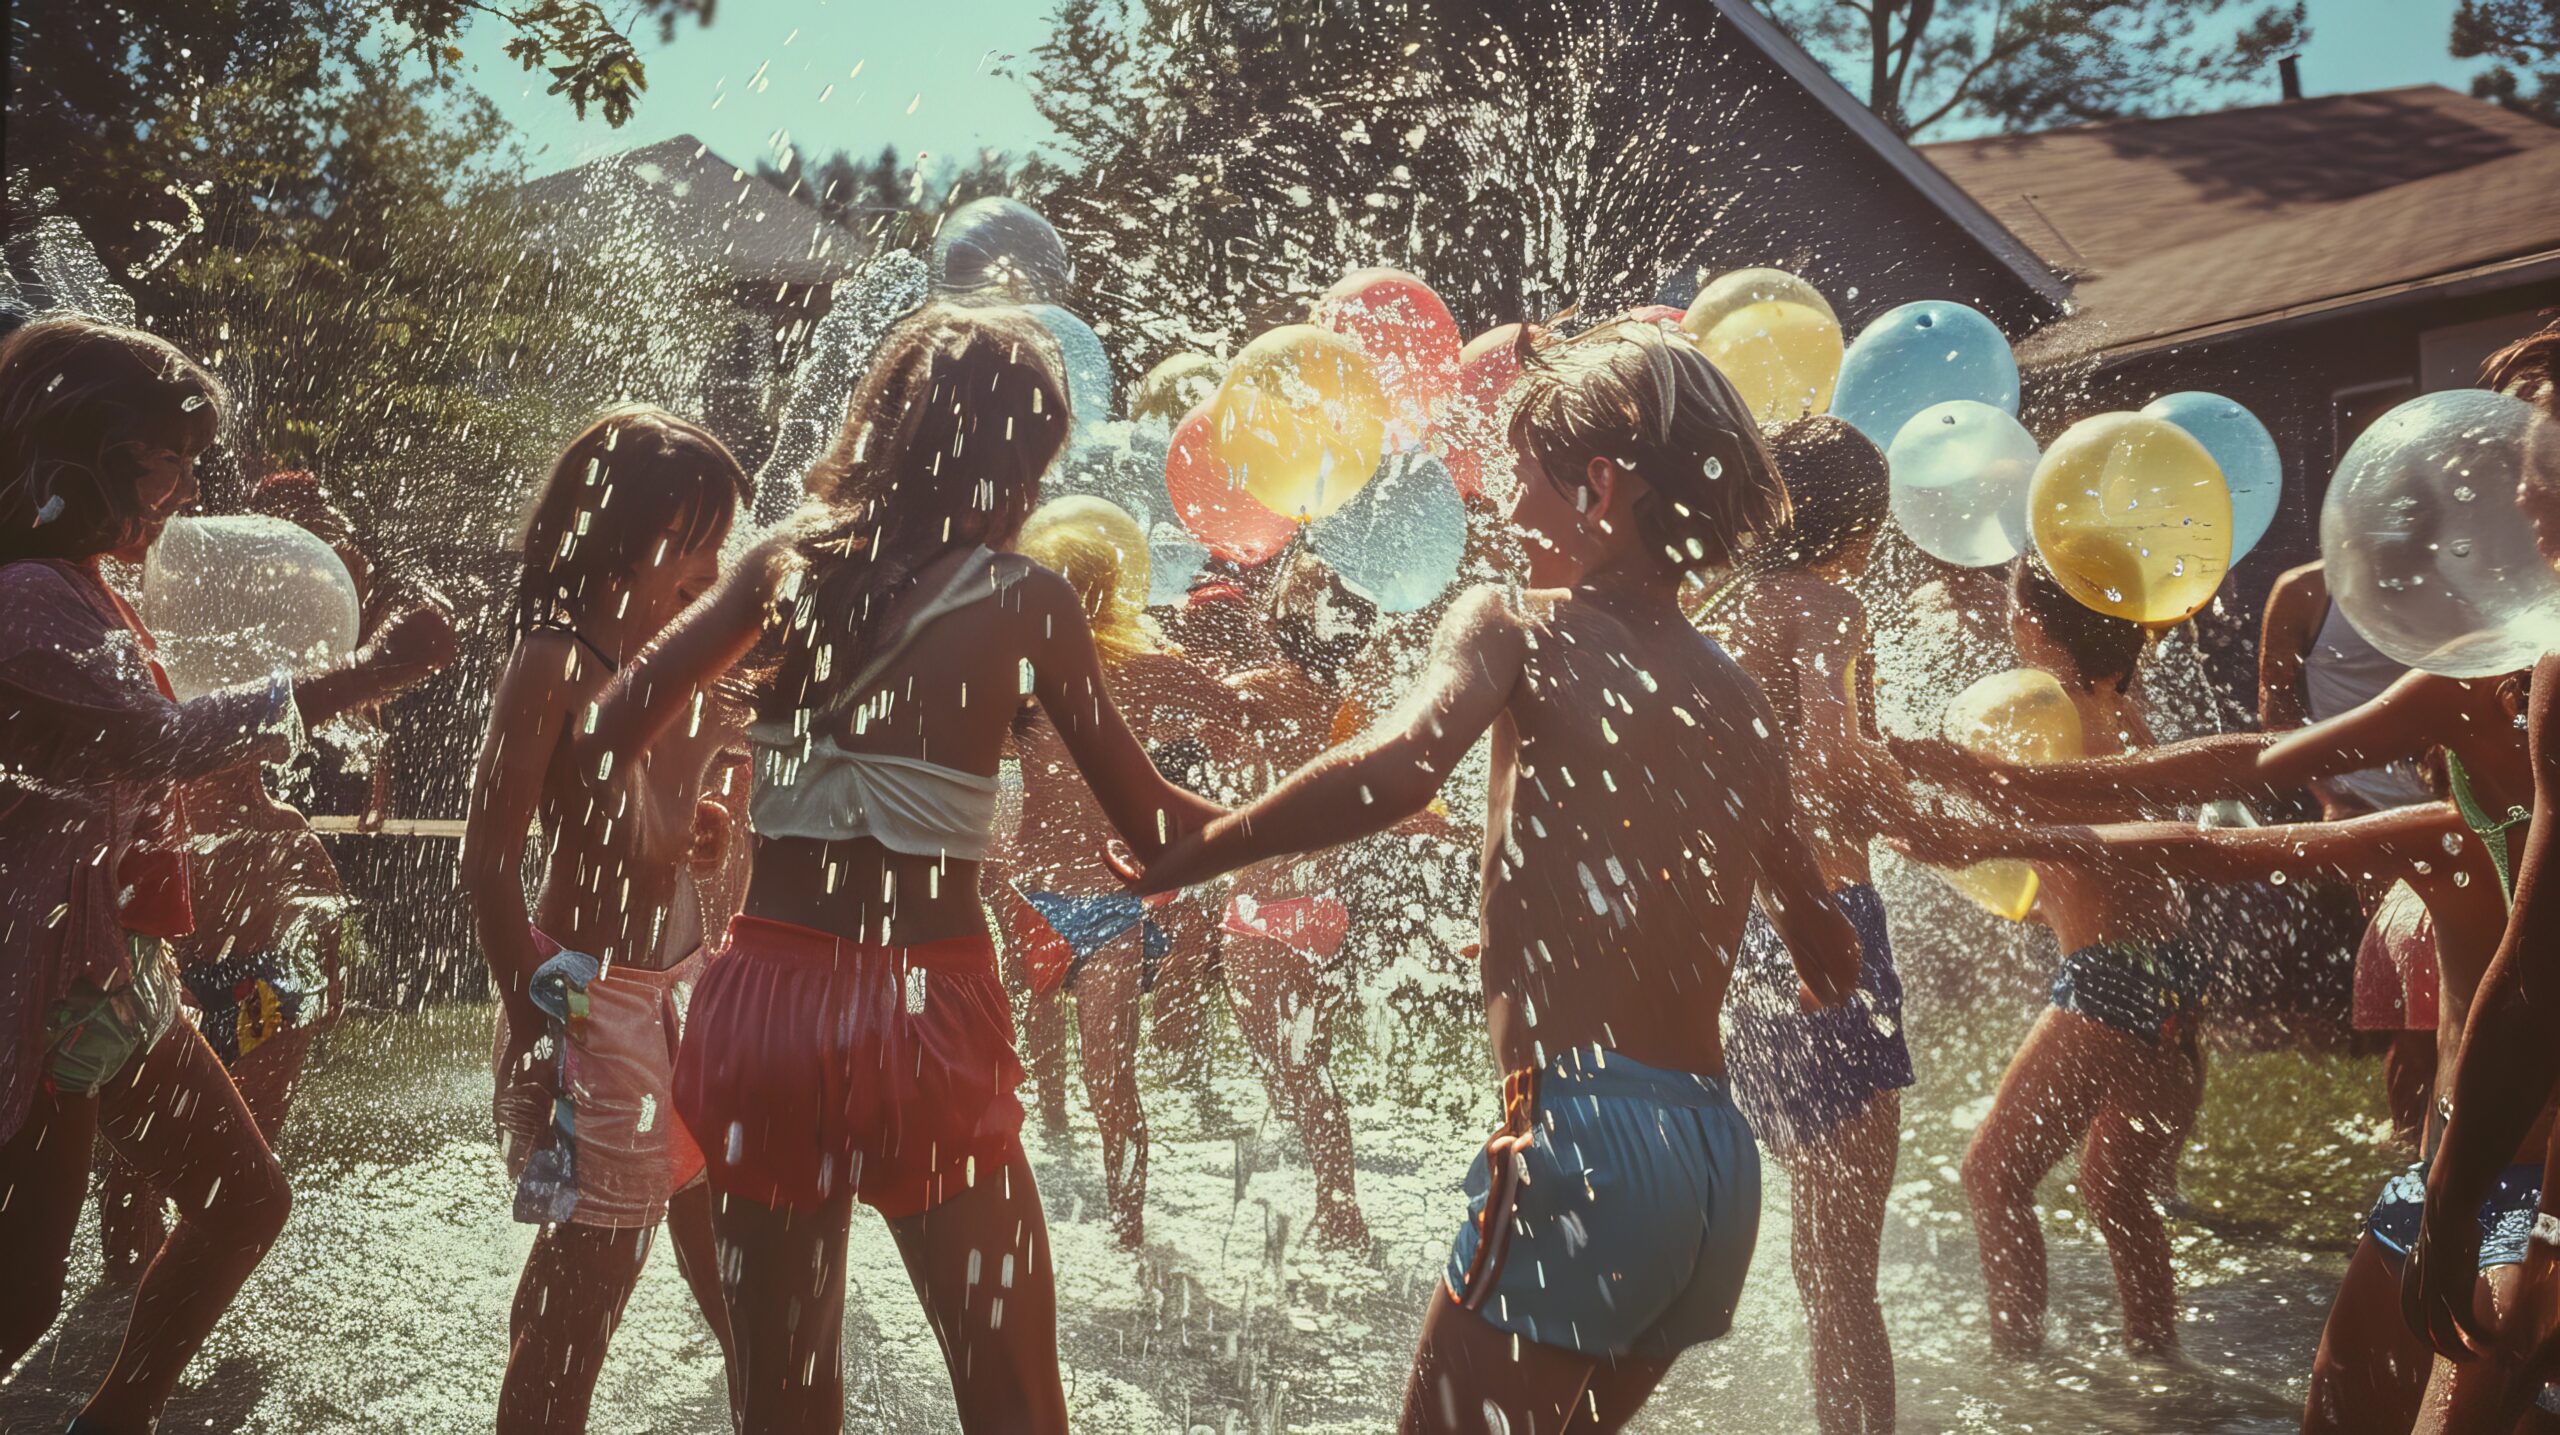 film photography 35mm, hyper-realistic photo, outfit and hairstyle are perfectly adapted to the 1980s style, the photograph was taken in the year 1980 Water Balloon Fight: Kids and adults engaged in a playful water balloon fight in a suburban backyard, wearing colorful shorts and t-shirts. The scene is filled with laughter, splashes, and flying balloons. --ar 16:9 Job ID: 1fec68a4-165b-4f0c-9bda-663db4b4d0c5